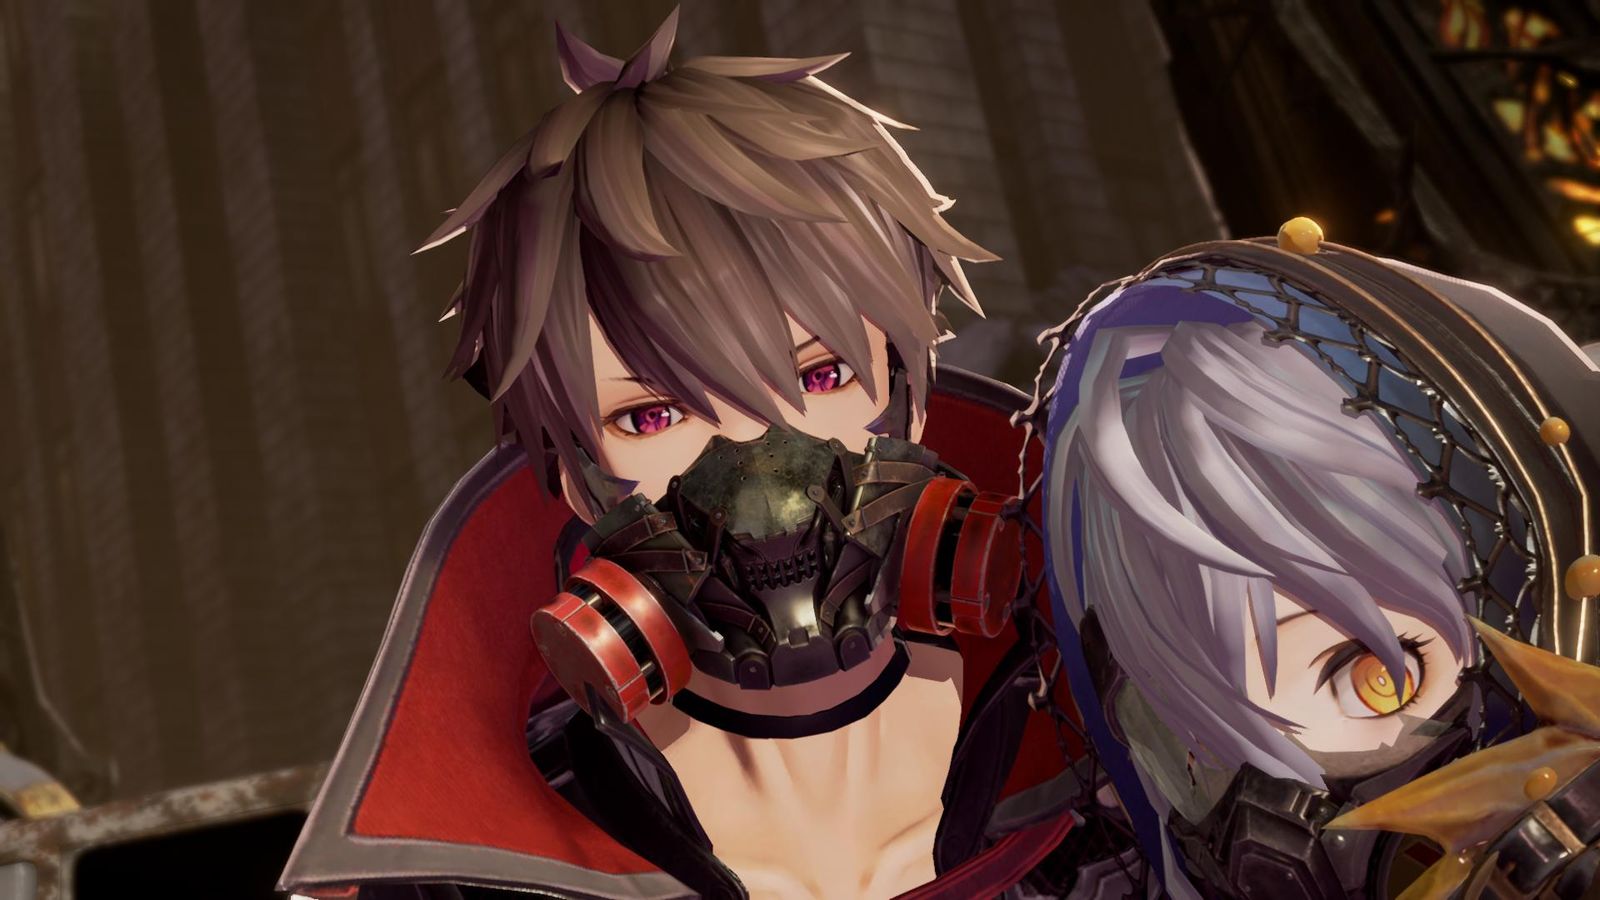 Xbox Games With Gold May 2021 Code Vein